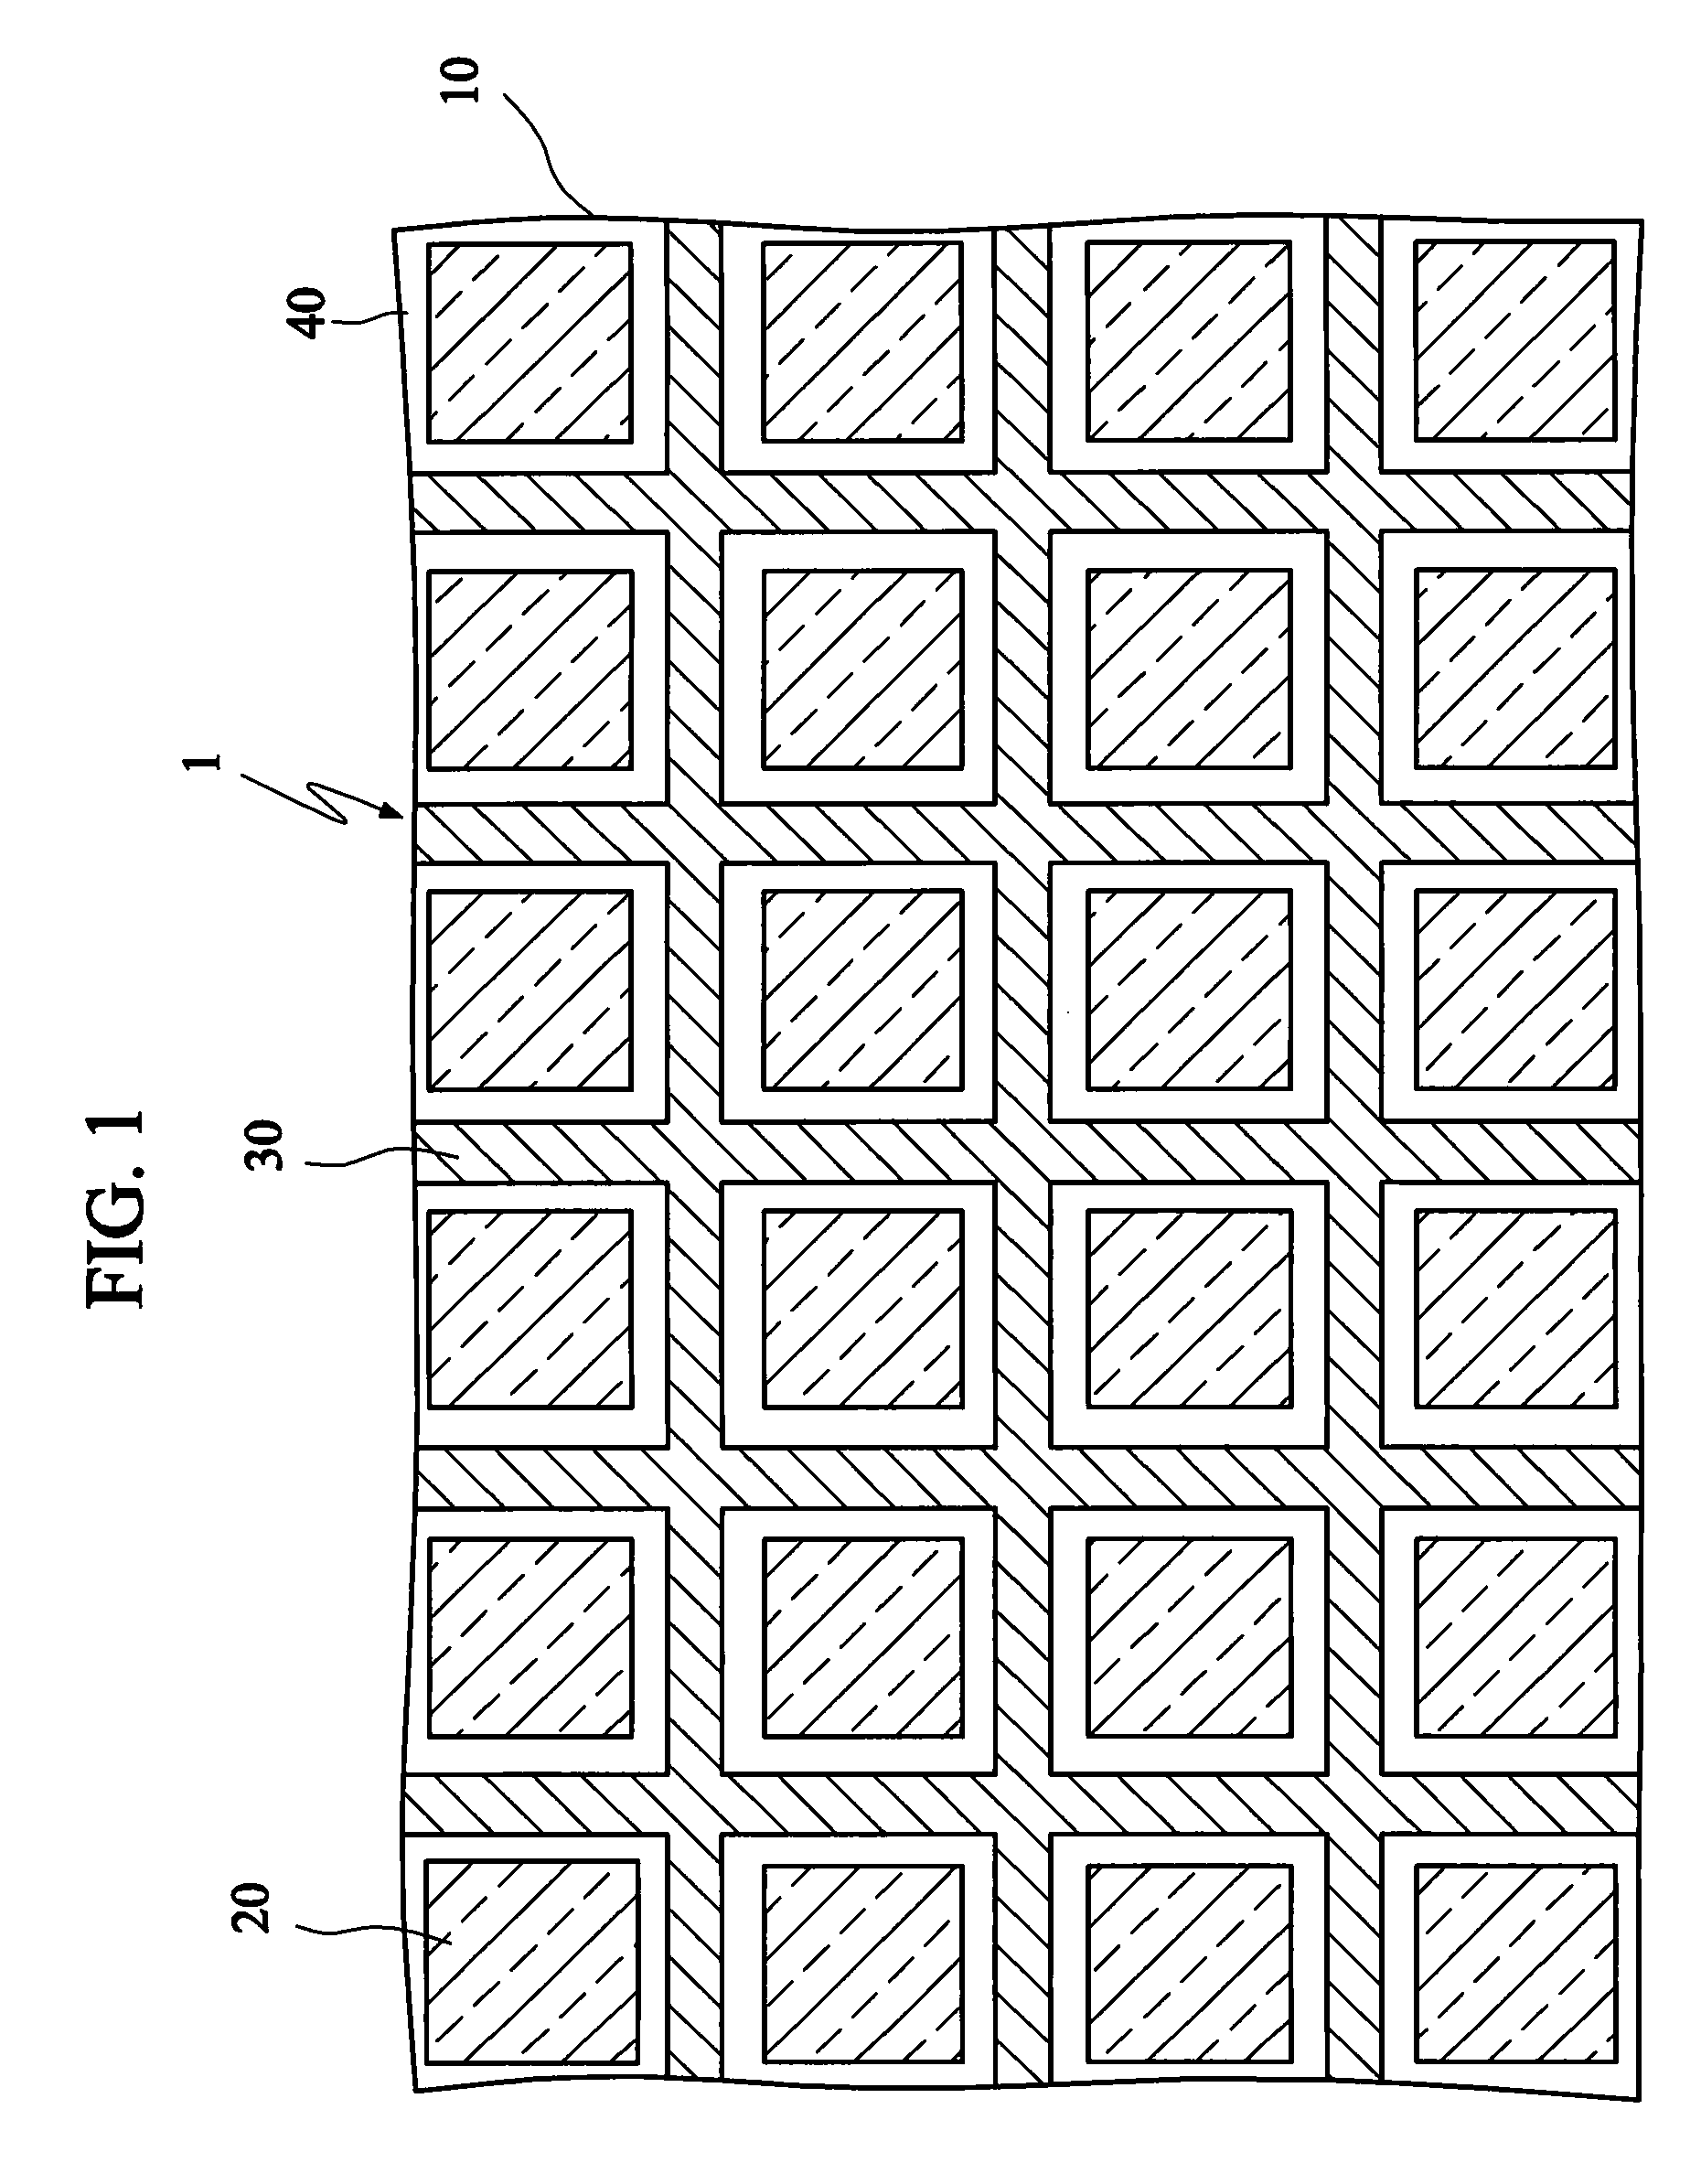 Imaging device with sense and couple electrodes